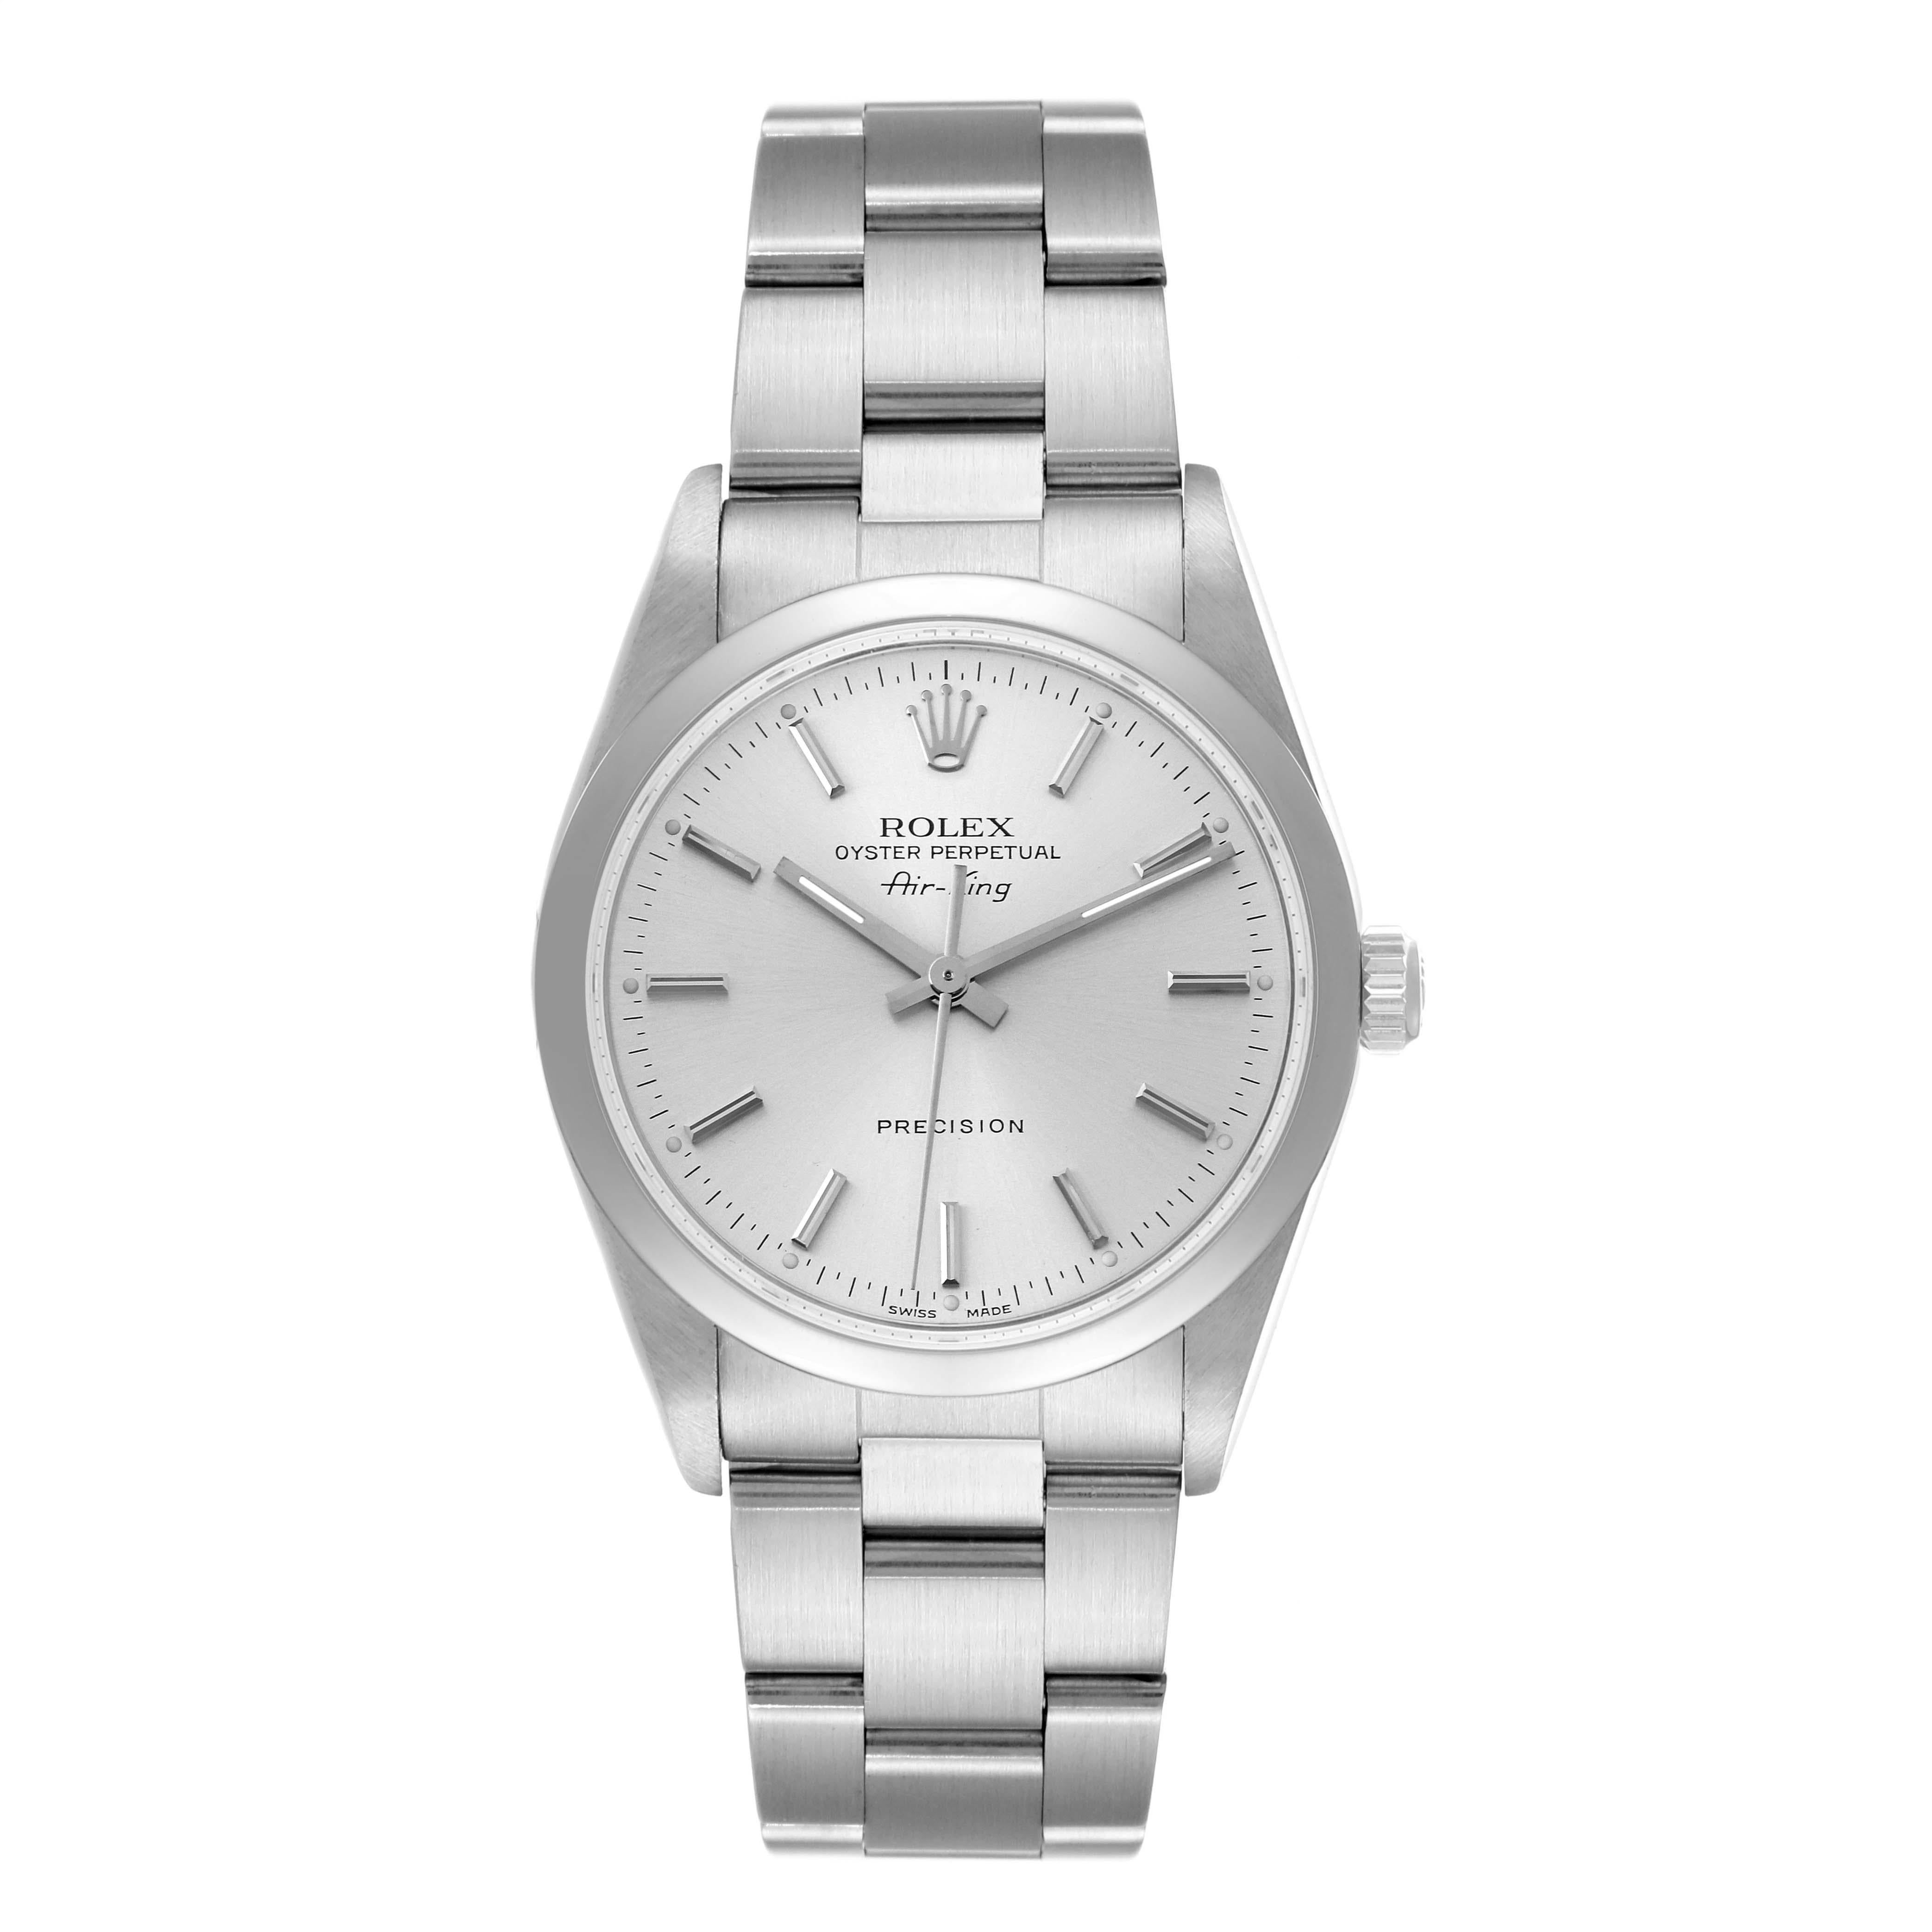 Rolex Air King Silver Dial Smooth Bezel Steel Mens Watch 14000. Automatic self-winding movement. Stainless steel case 34 mm in diameter. Rolex logo on the crown. Stainless steel smooth bezel. Scratch resistant sapphire crystal. Silver dial with